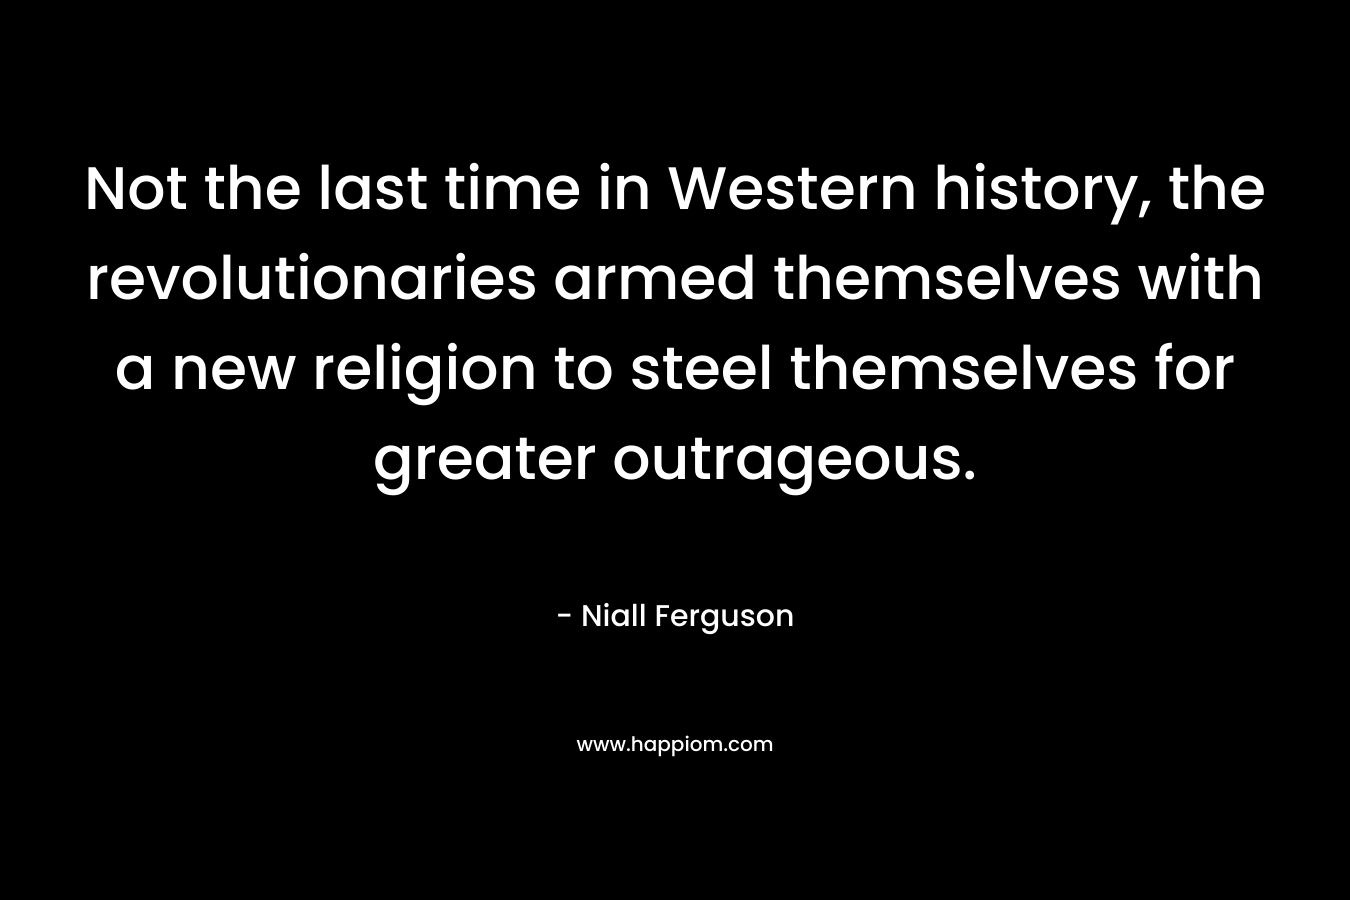 Not the last time in Western history, the revolutionaries armed themselves with a new religion to steel themselves for greater outrageous. – Niall Ferguson